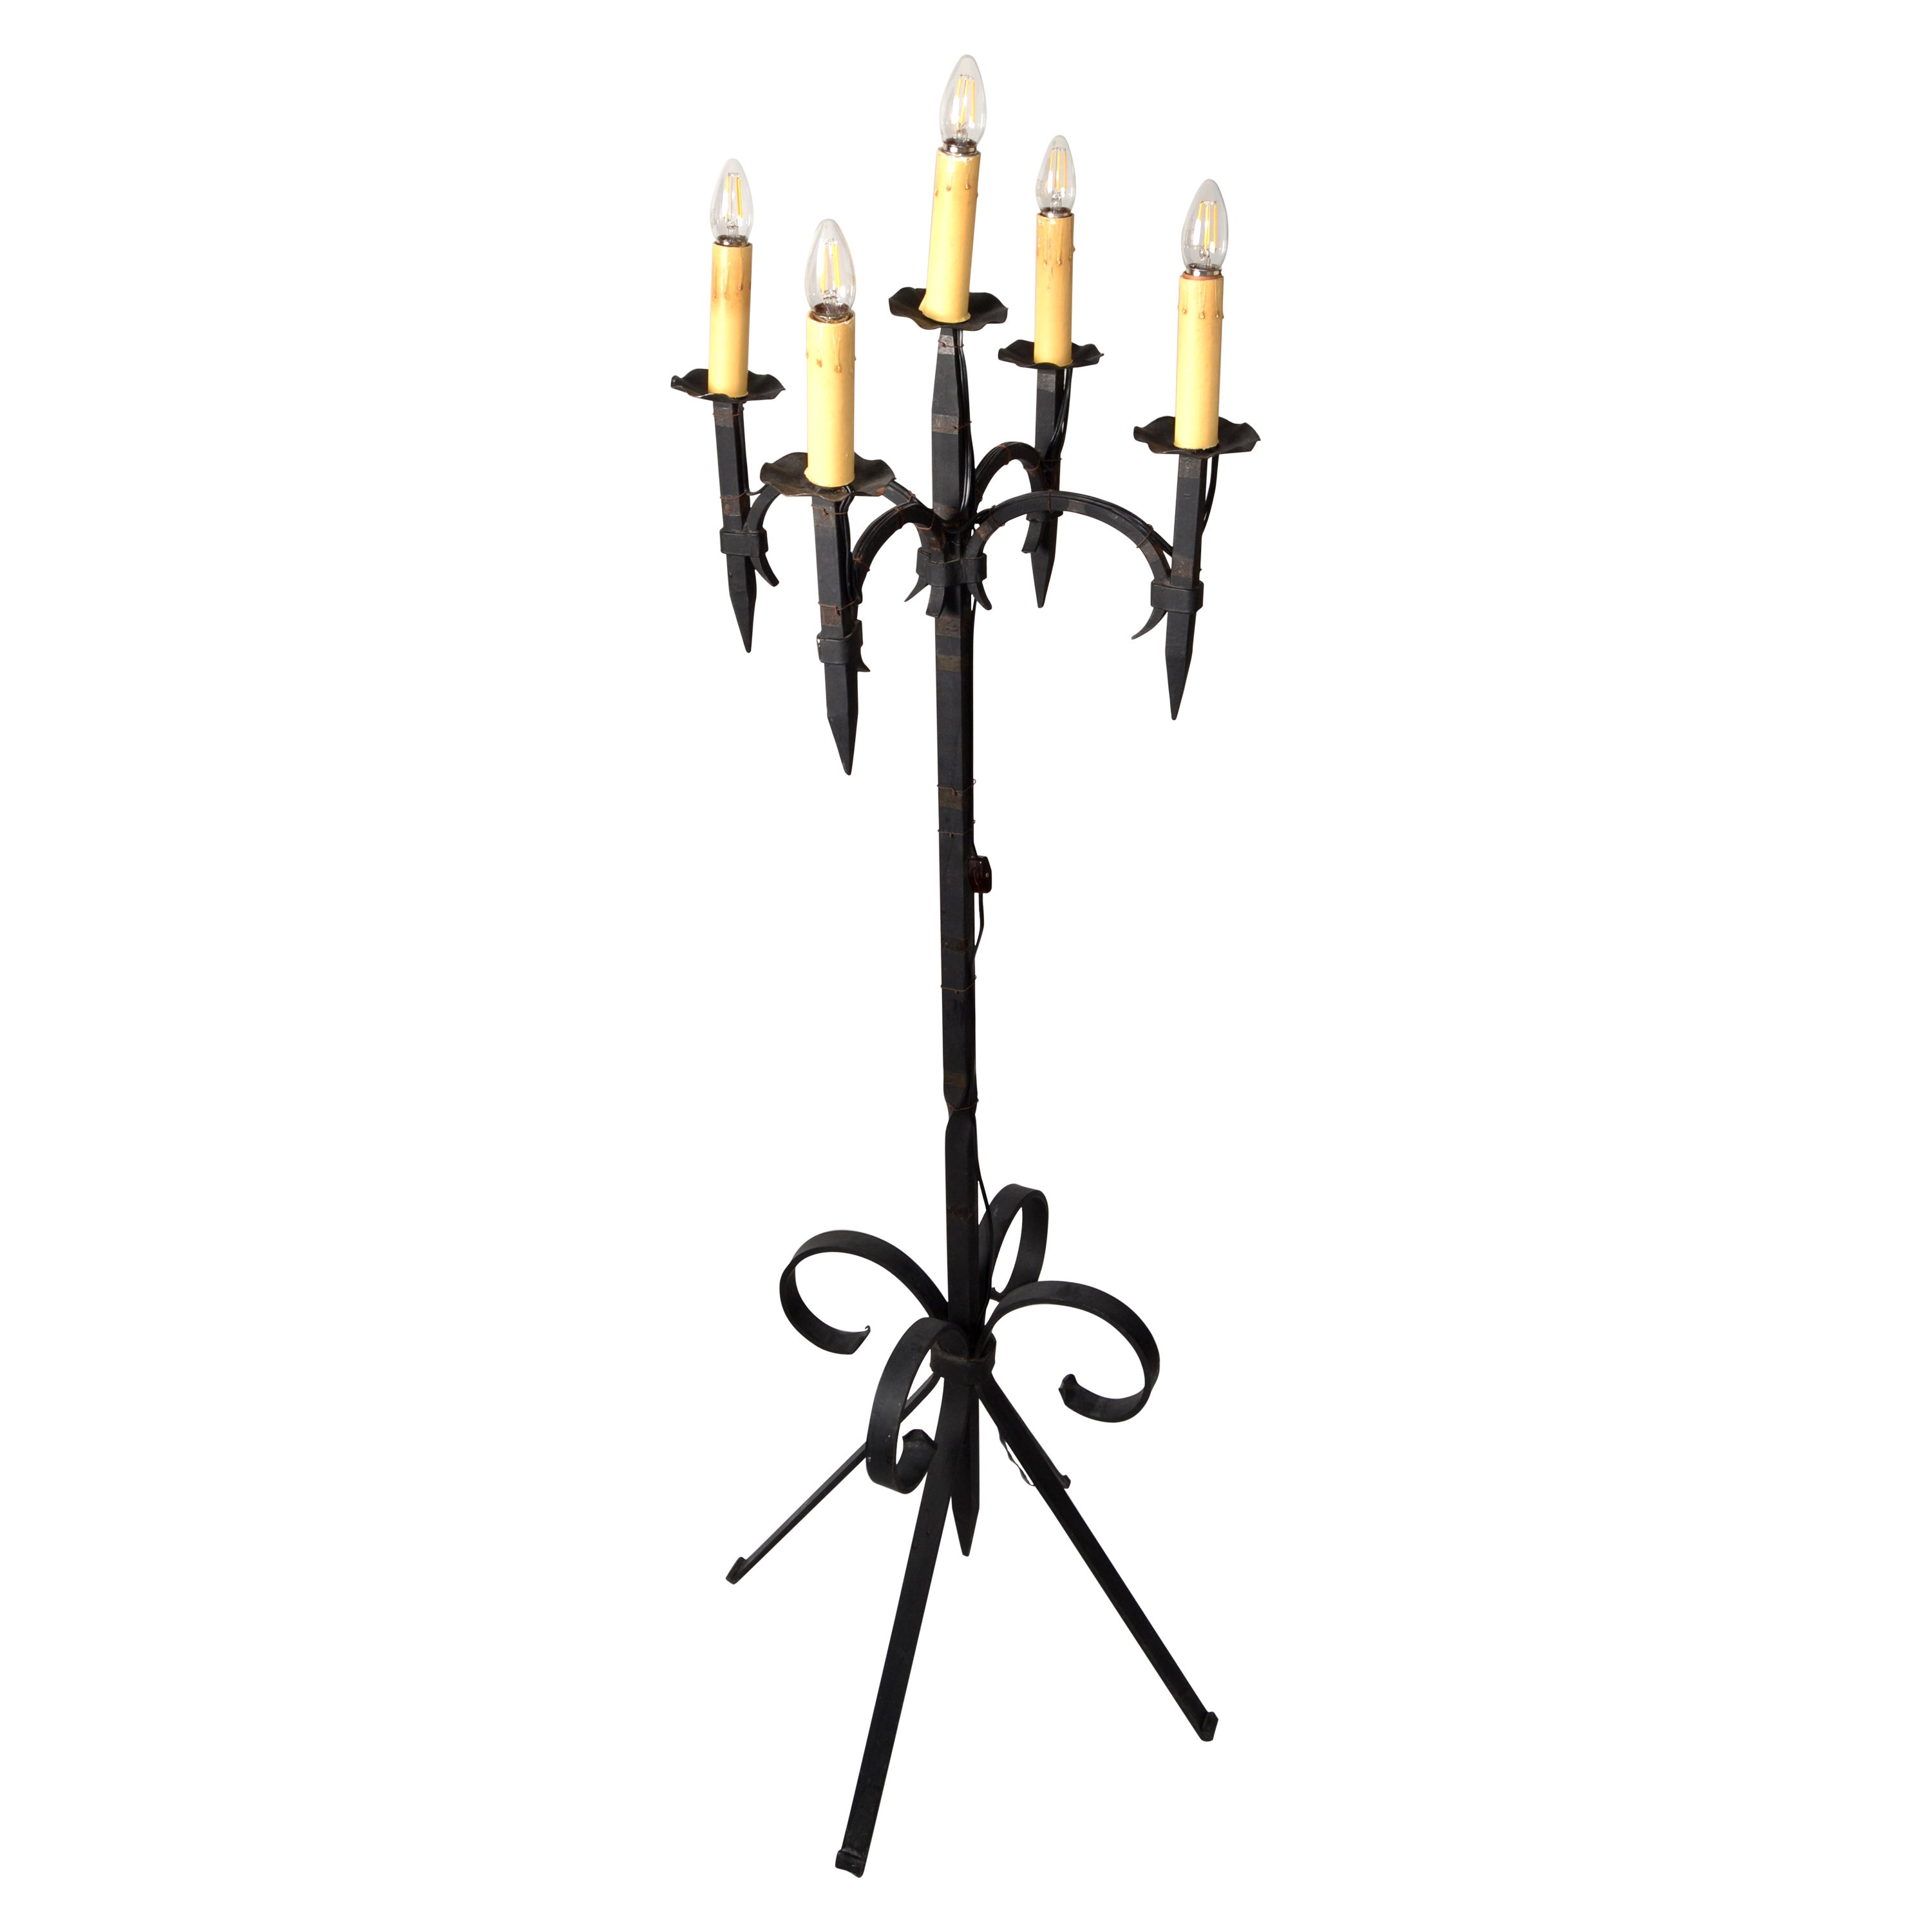 Early 20th Century French Forged Wrought Iron 5 Light Candelabra Floor Lamp